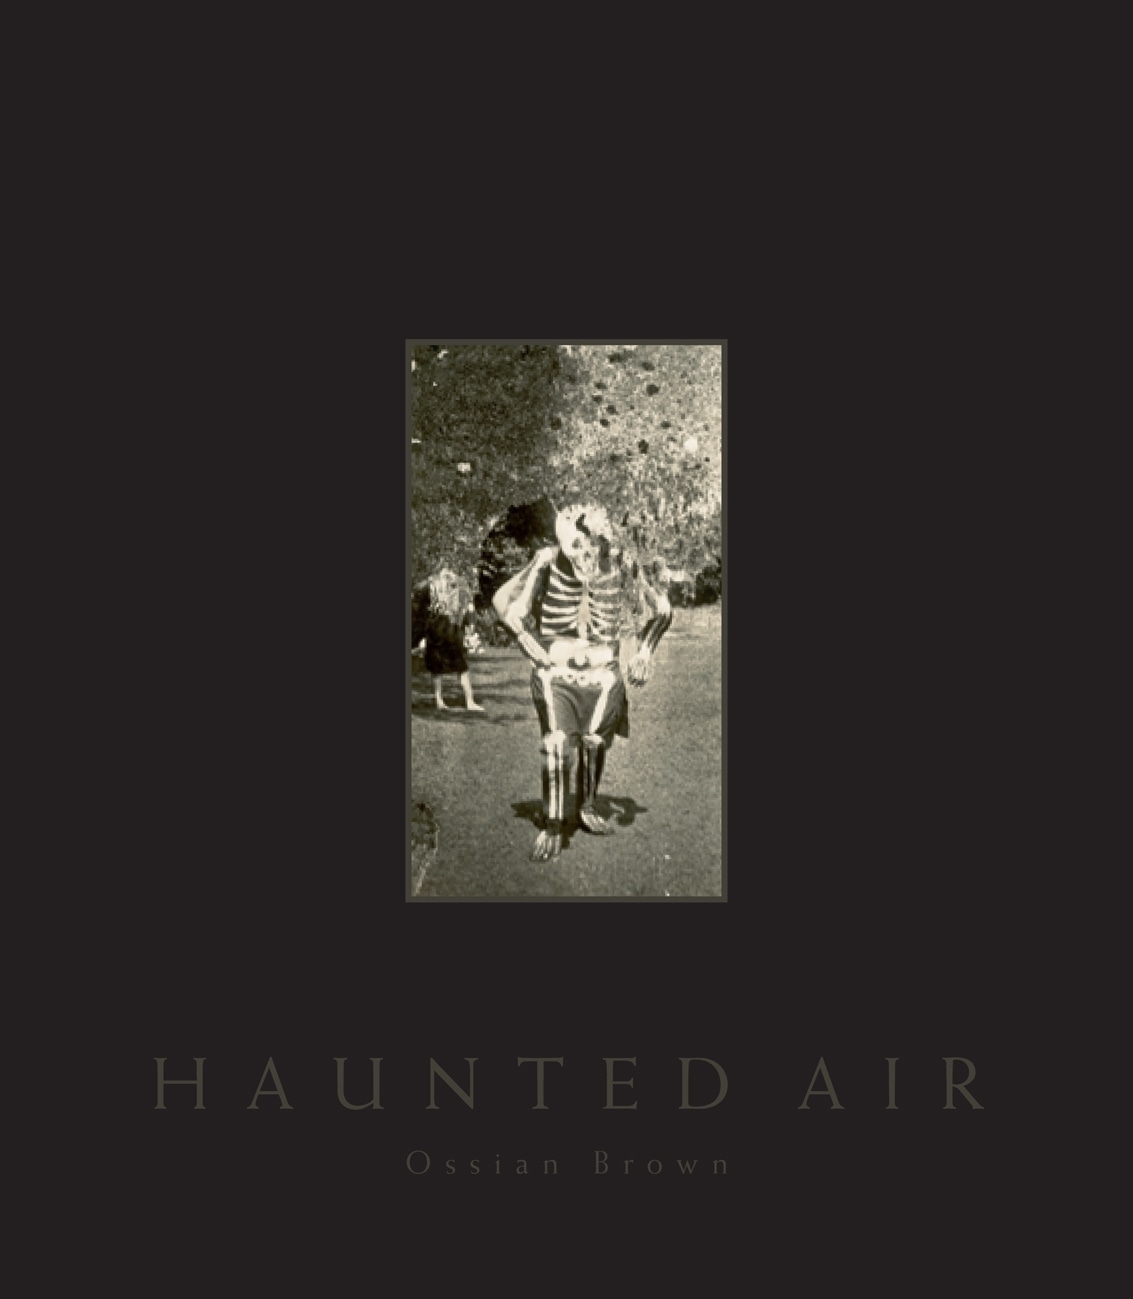 Book “Haunted Air” by Ossian Brown, David Lynch — June 27, 2022